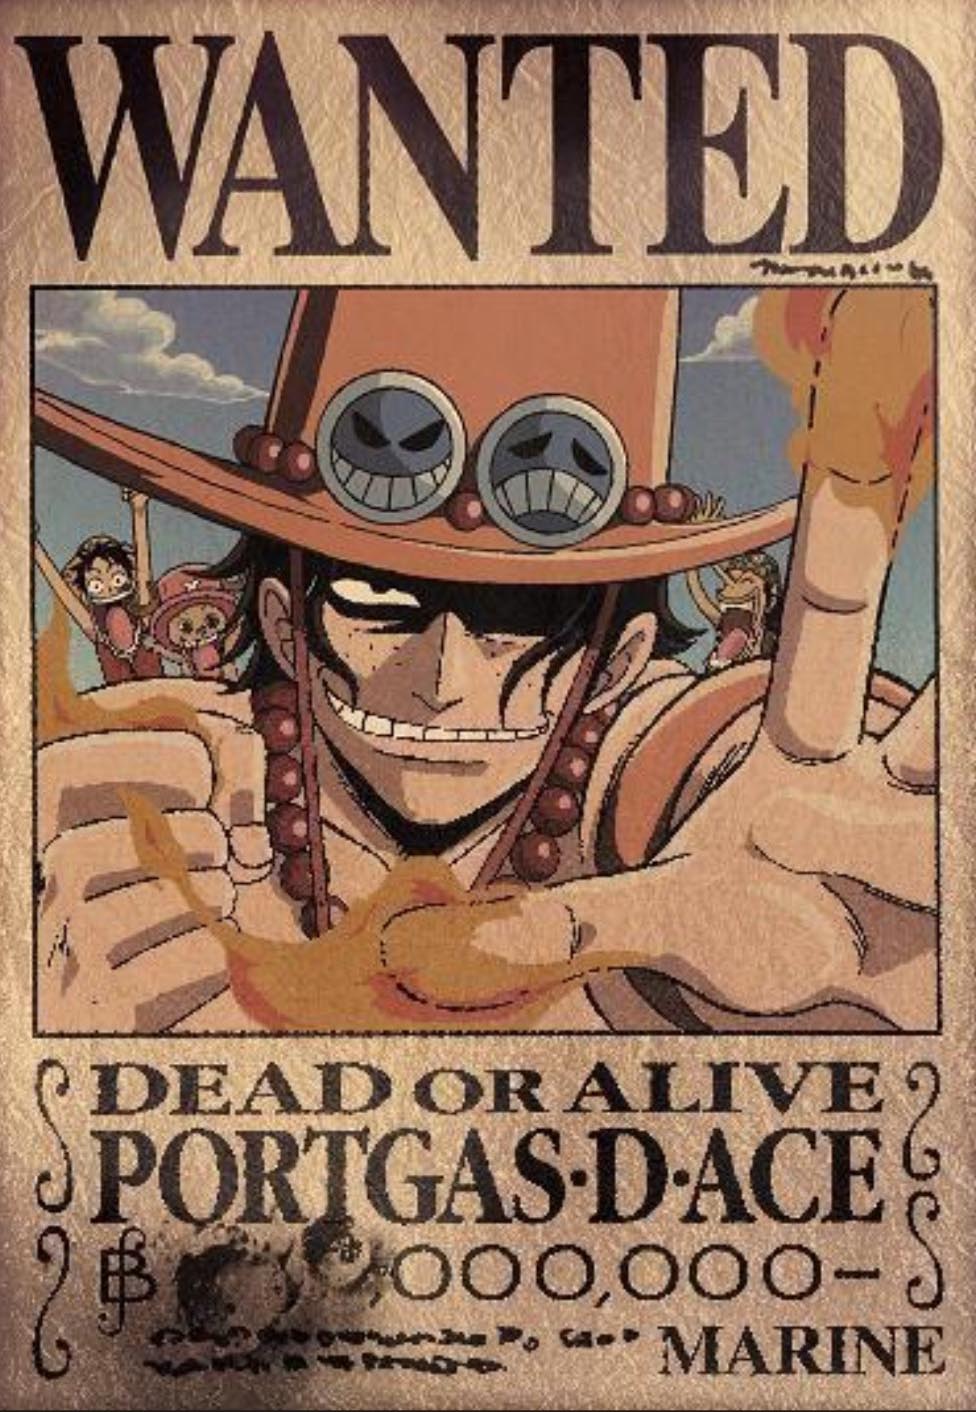 One Piece Wanted Poster Wallpapers Top Những Hình Ảnh Đẹp